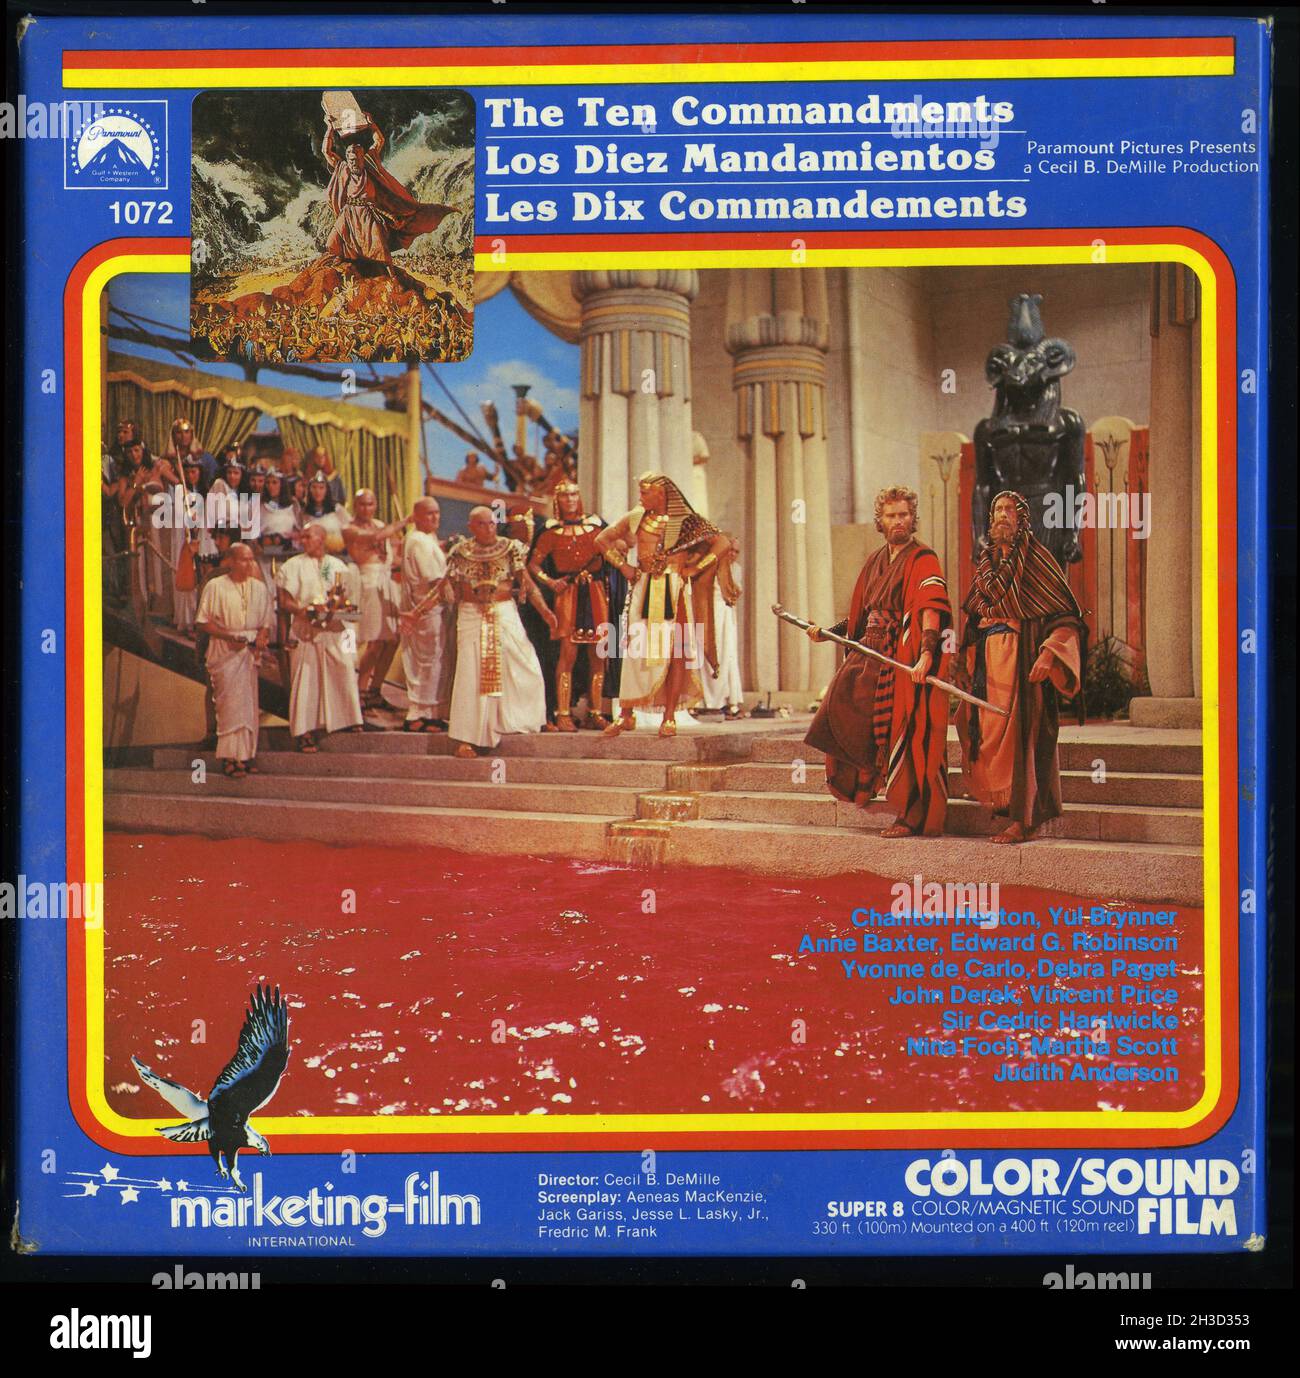 Front cover of a Super 8 fillm of the 1956 MGM film The Ten Commandments, starring Charlton Heston and Yul Brynner. Stock Photo